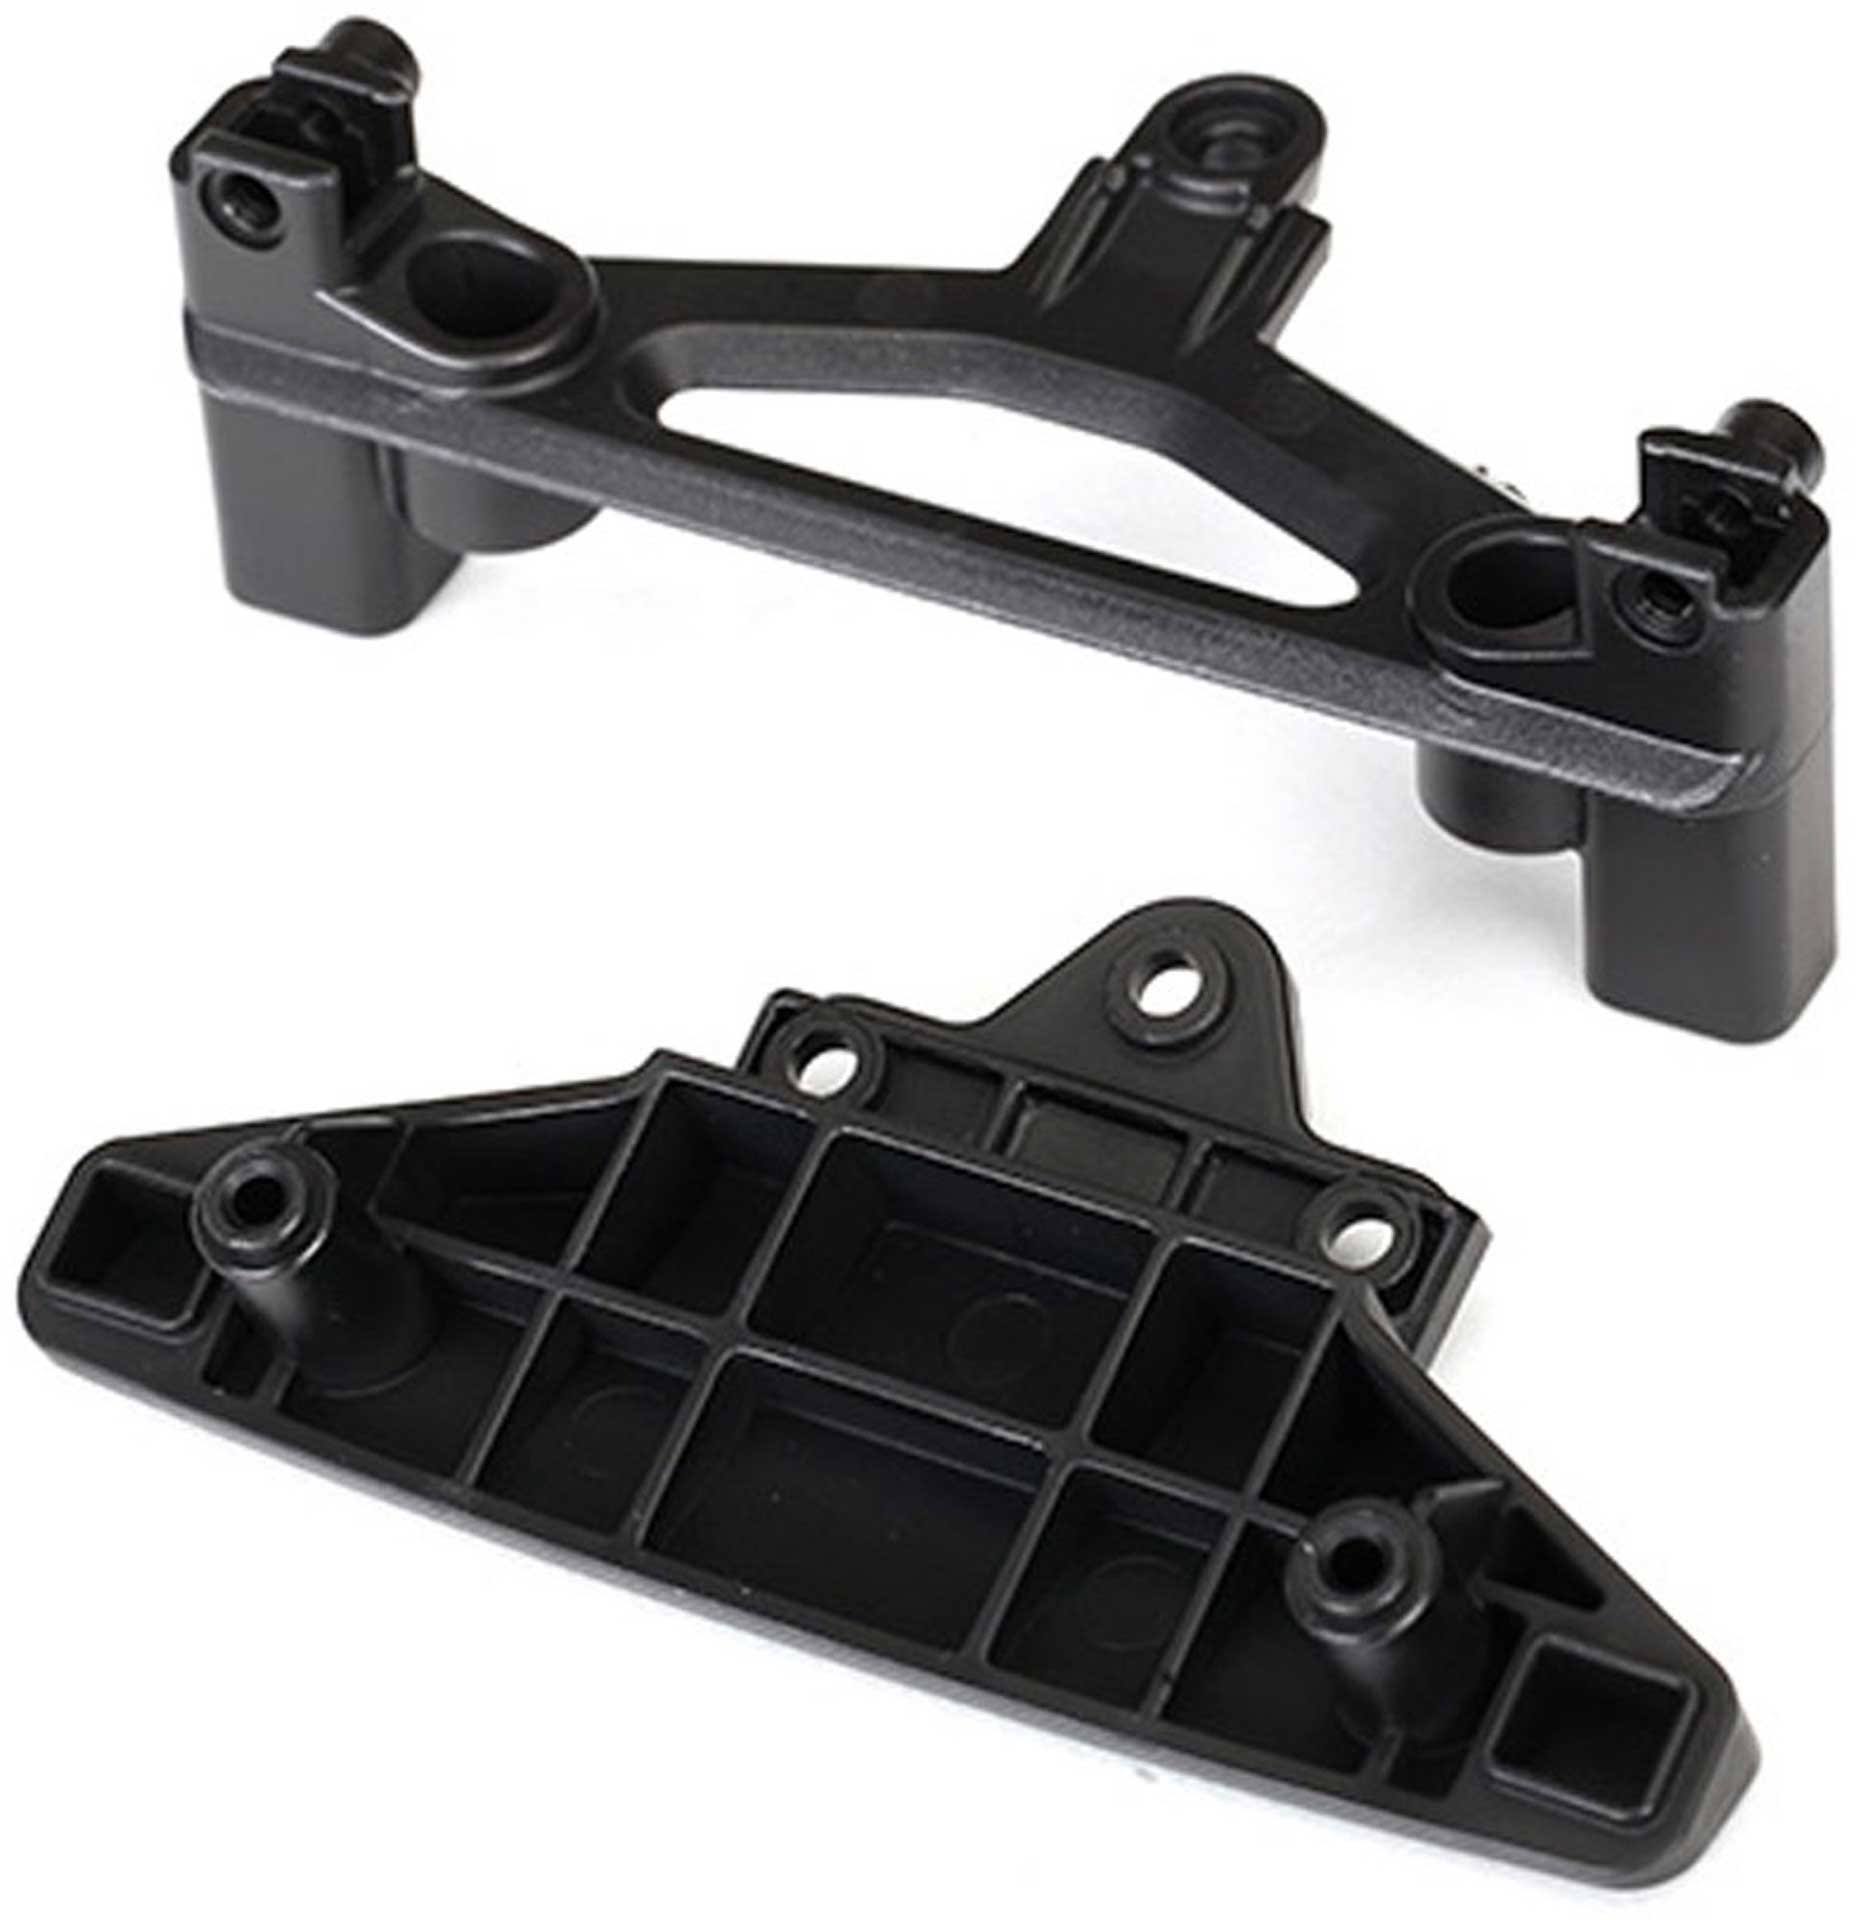 Traxxas Tra8335 Front Upper & Lower Bumper